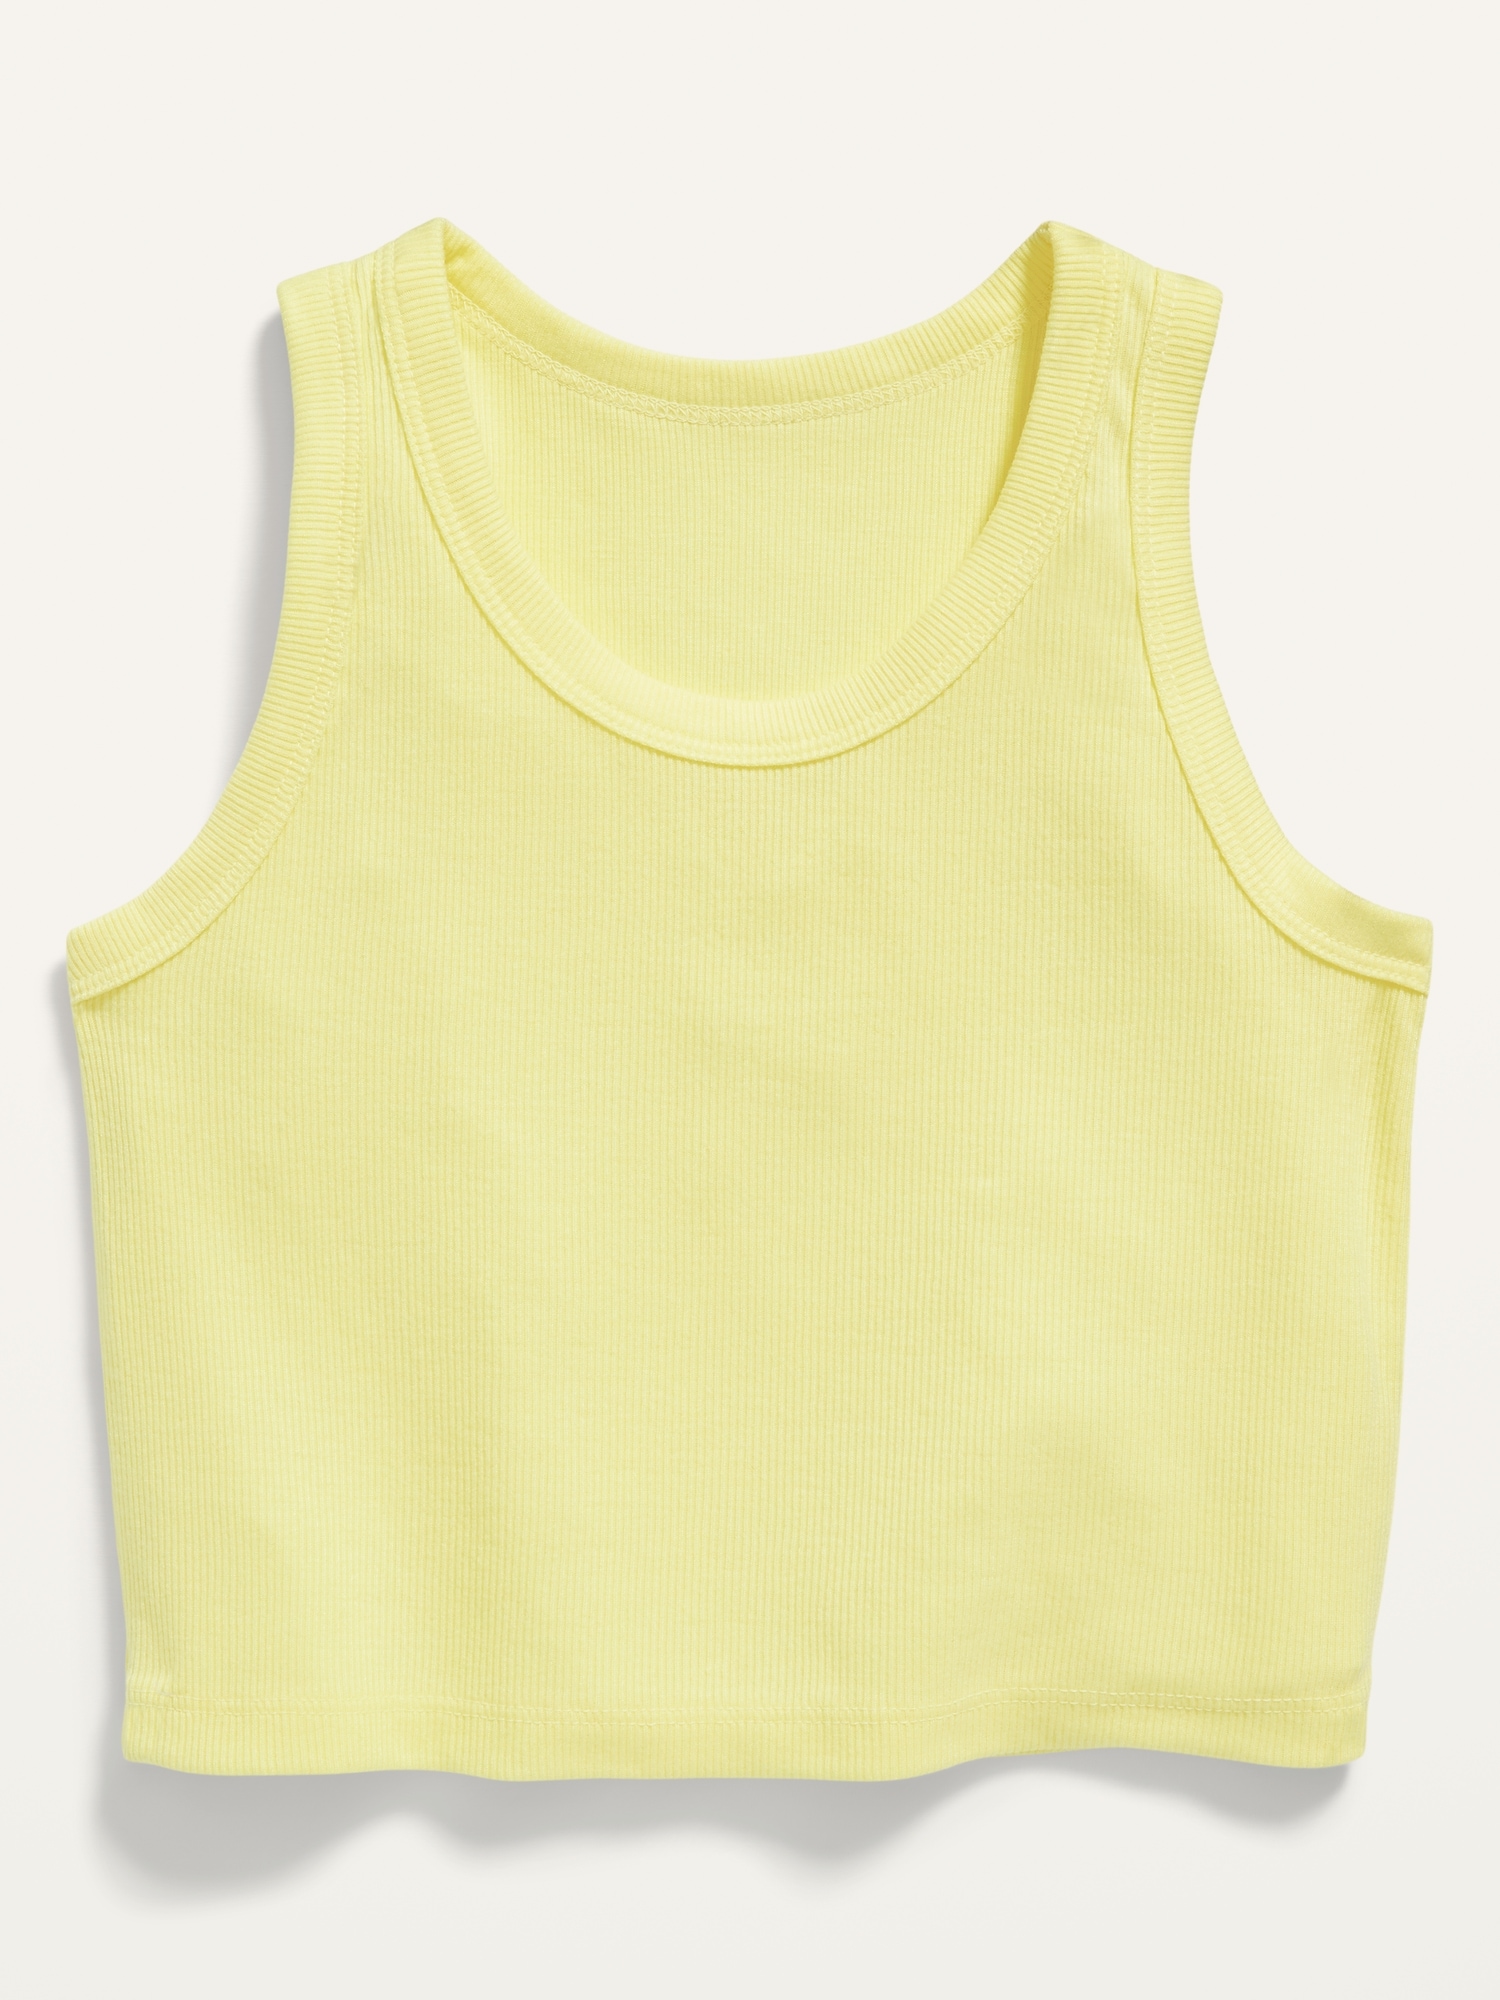 Old Navy Cropped UltraLite Rib-Knit Performance Tank for Girls yellow. 1